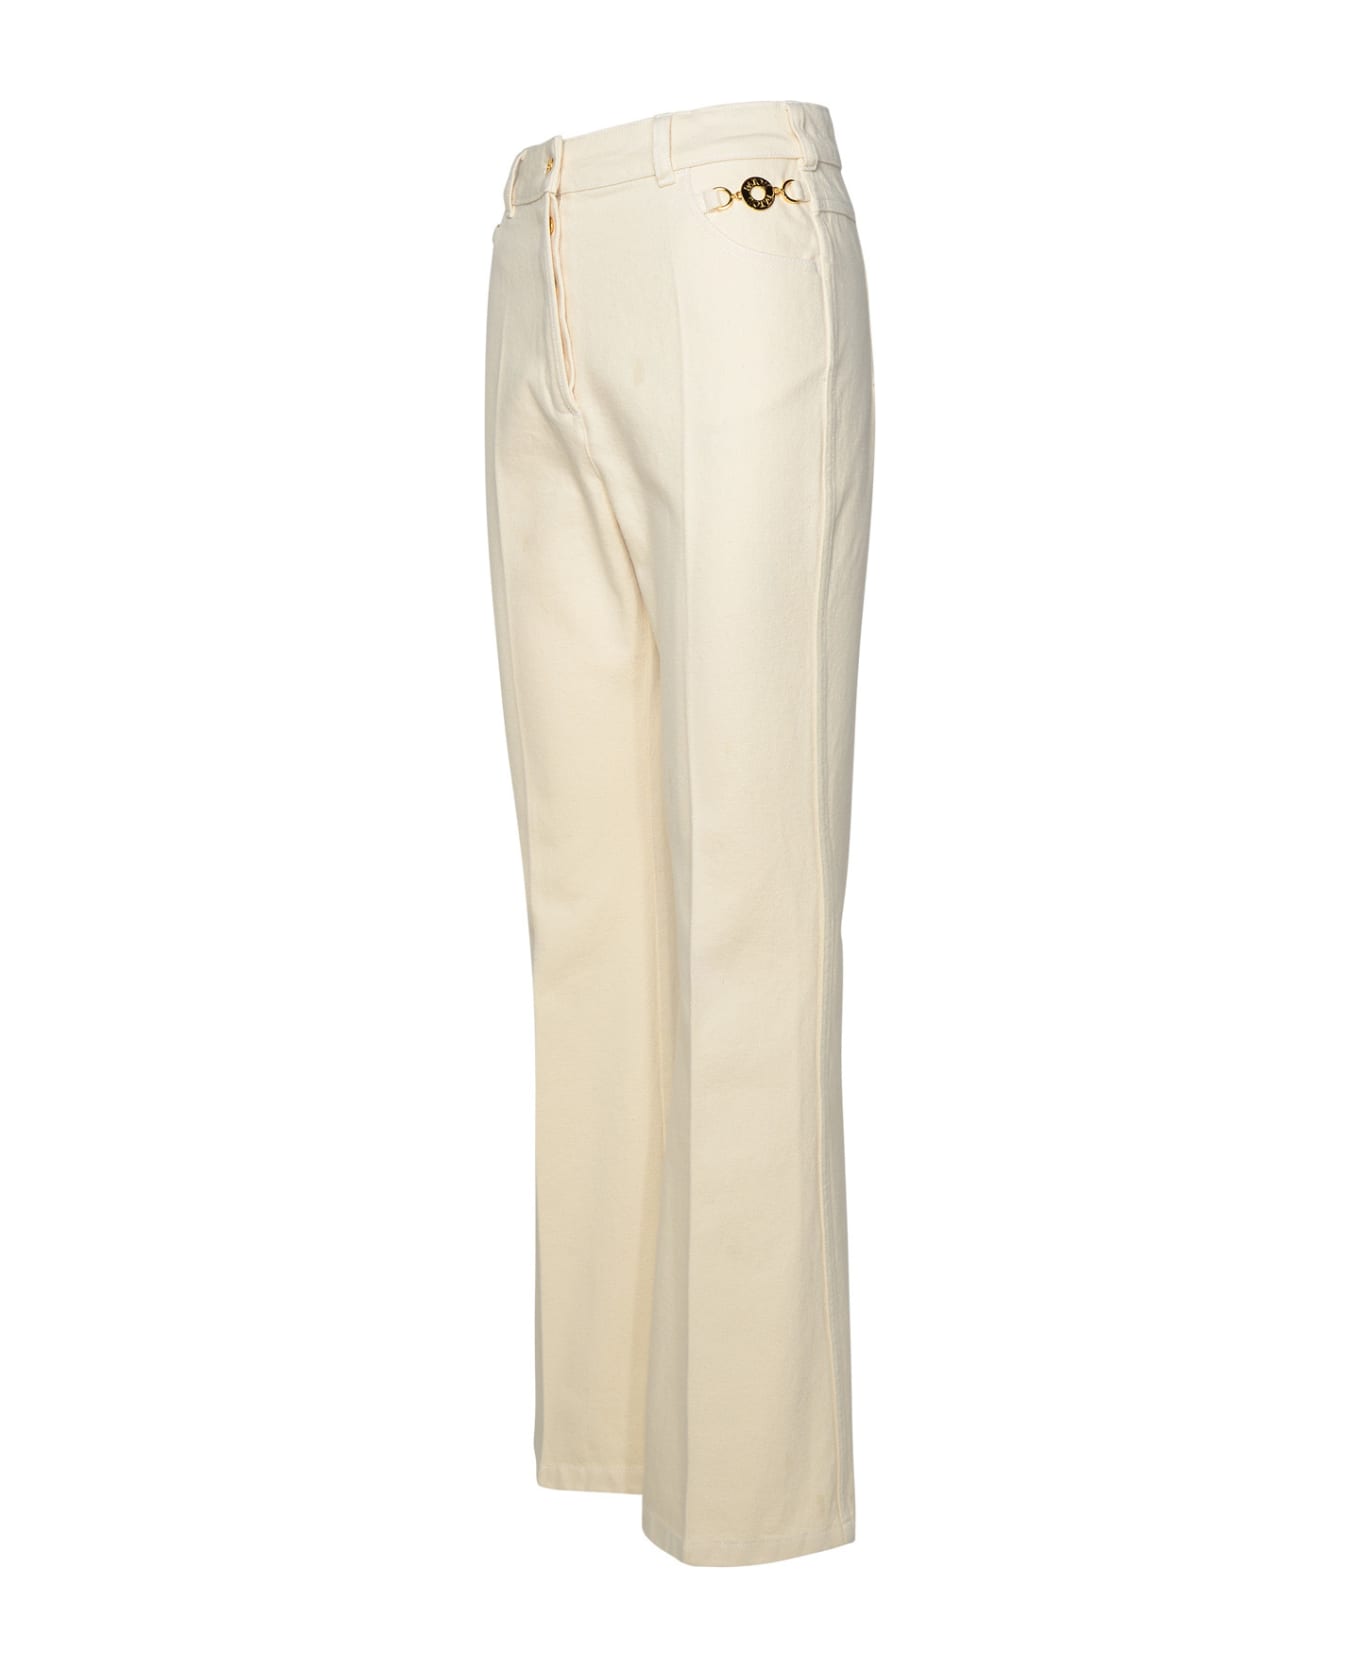 Patou Ivory Cotton Flare Jeans - NEUTRALS ボトムス